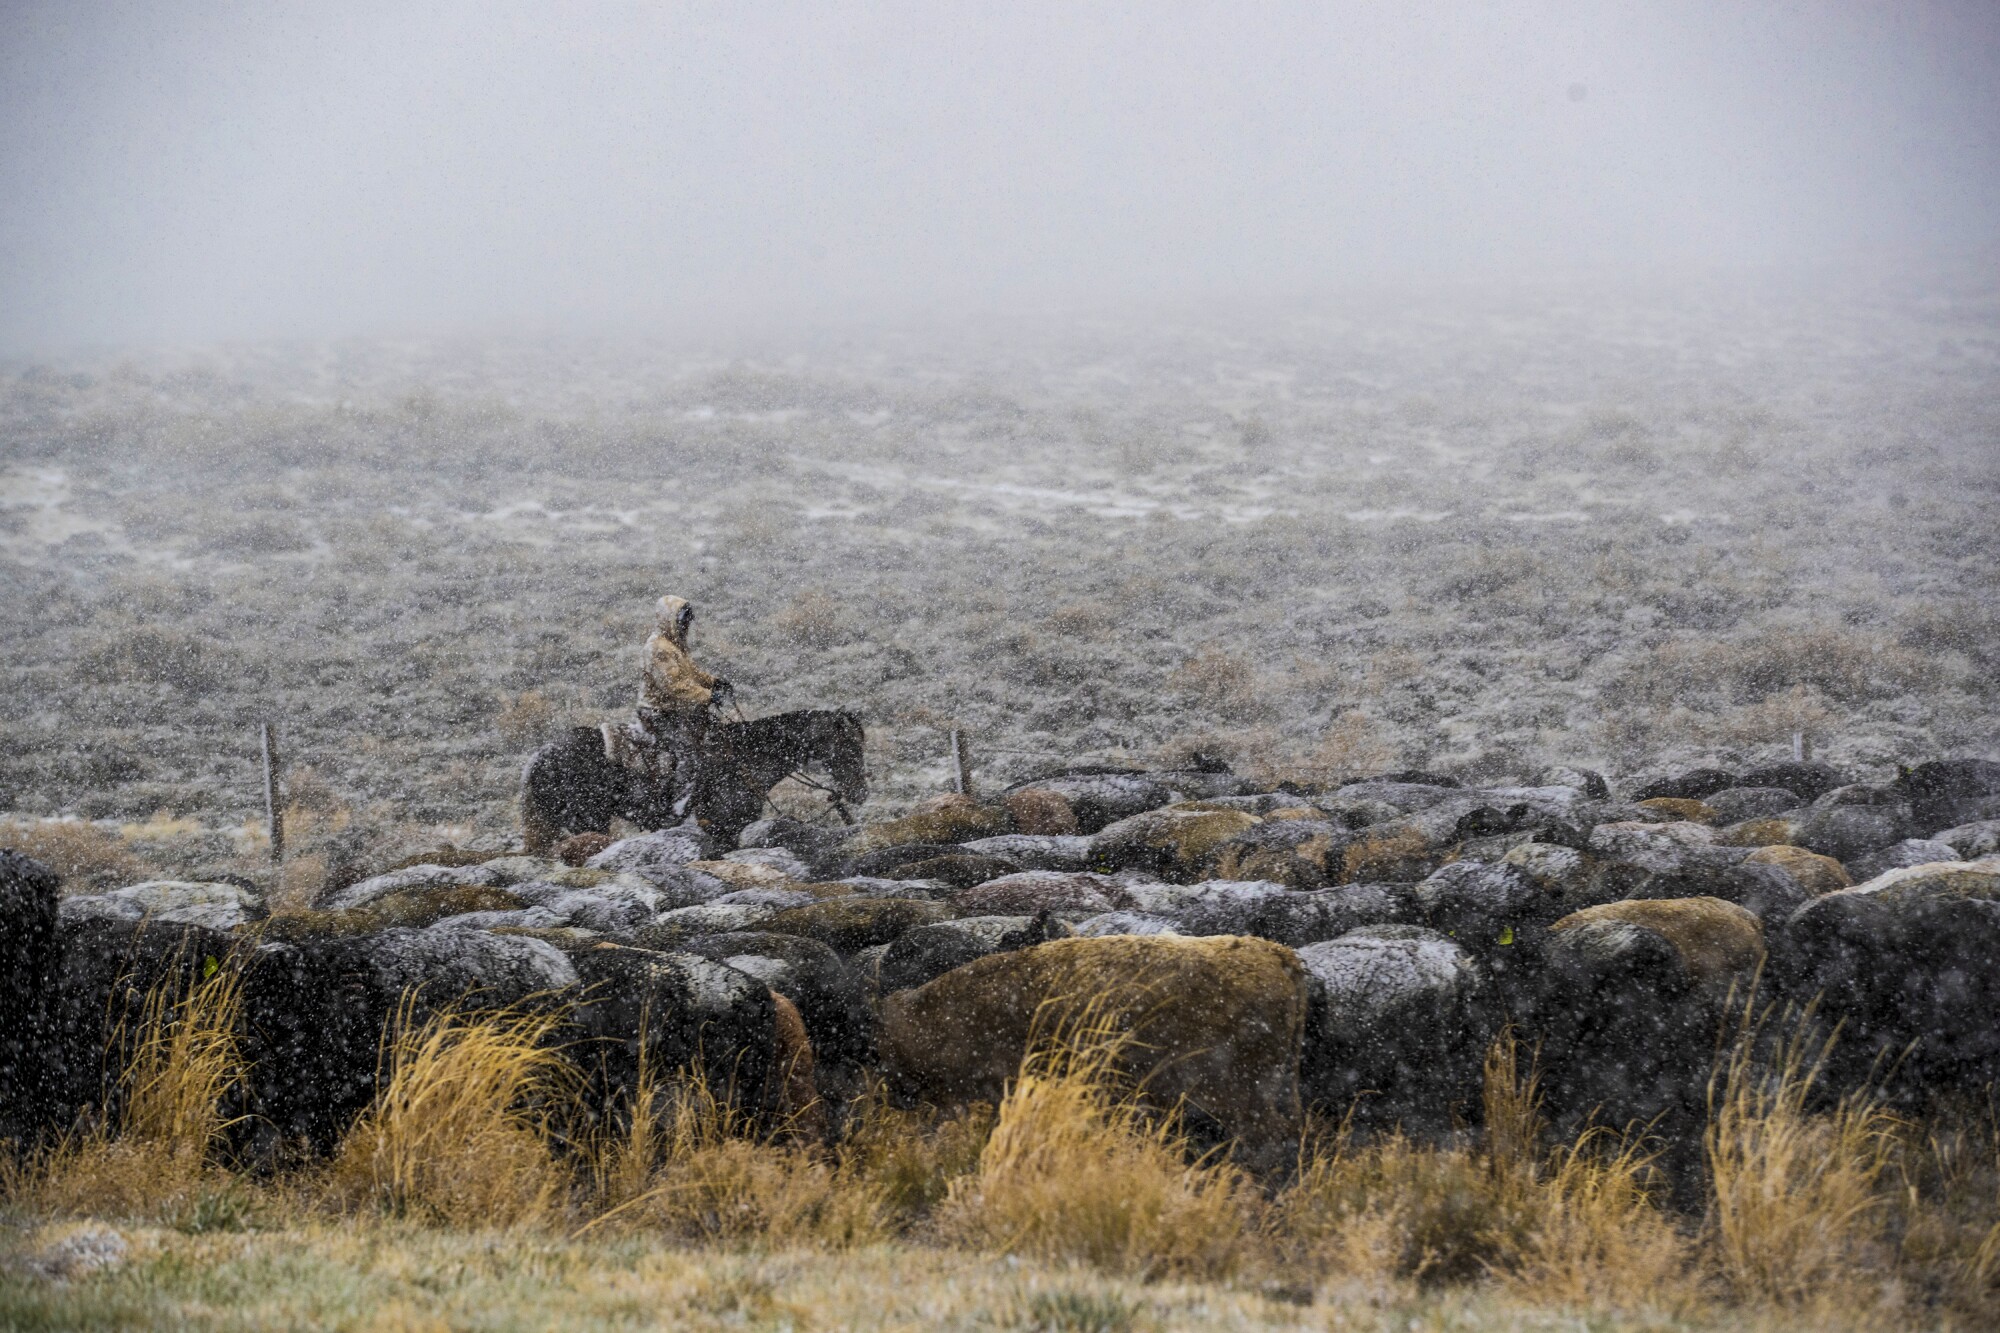 A worker moves cattle at Overland Trail Ranch as a snowstorm moves in.